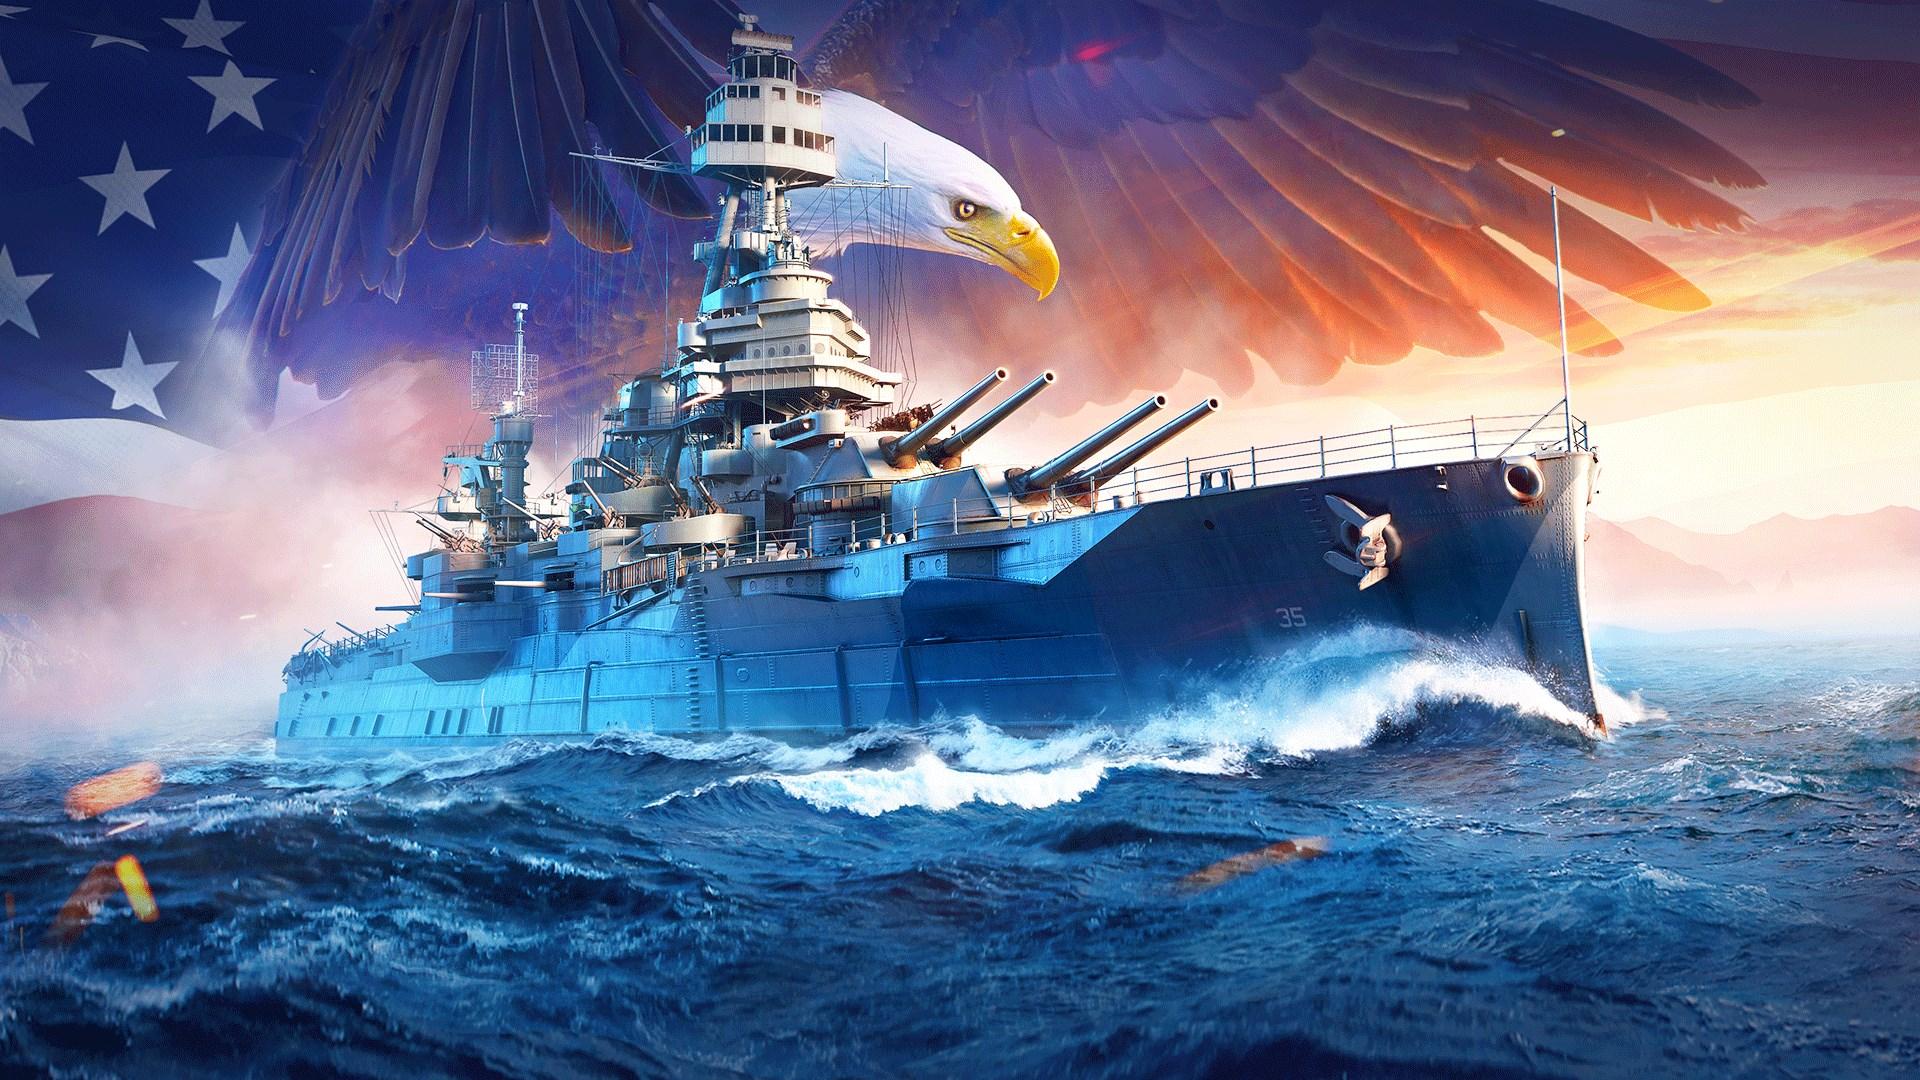 World Of Warships Legends - Rising Legend Wallpapers - Wallpaper Cave